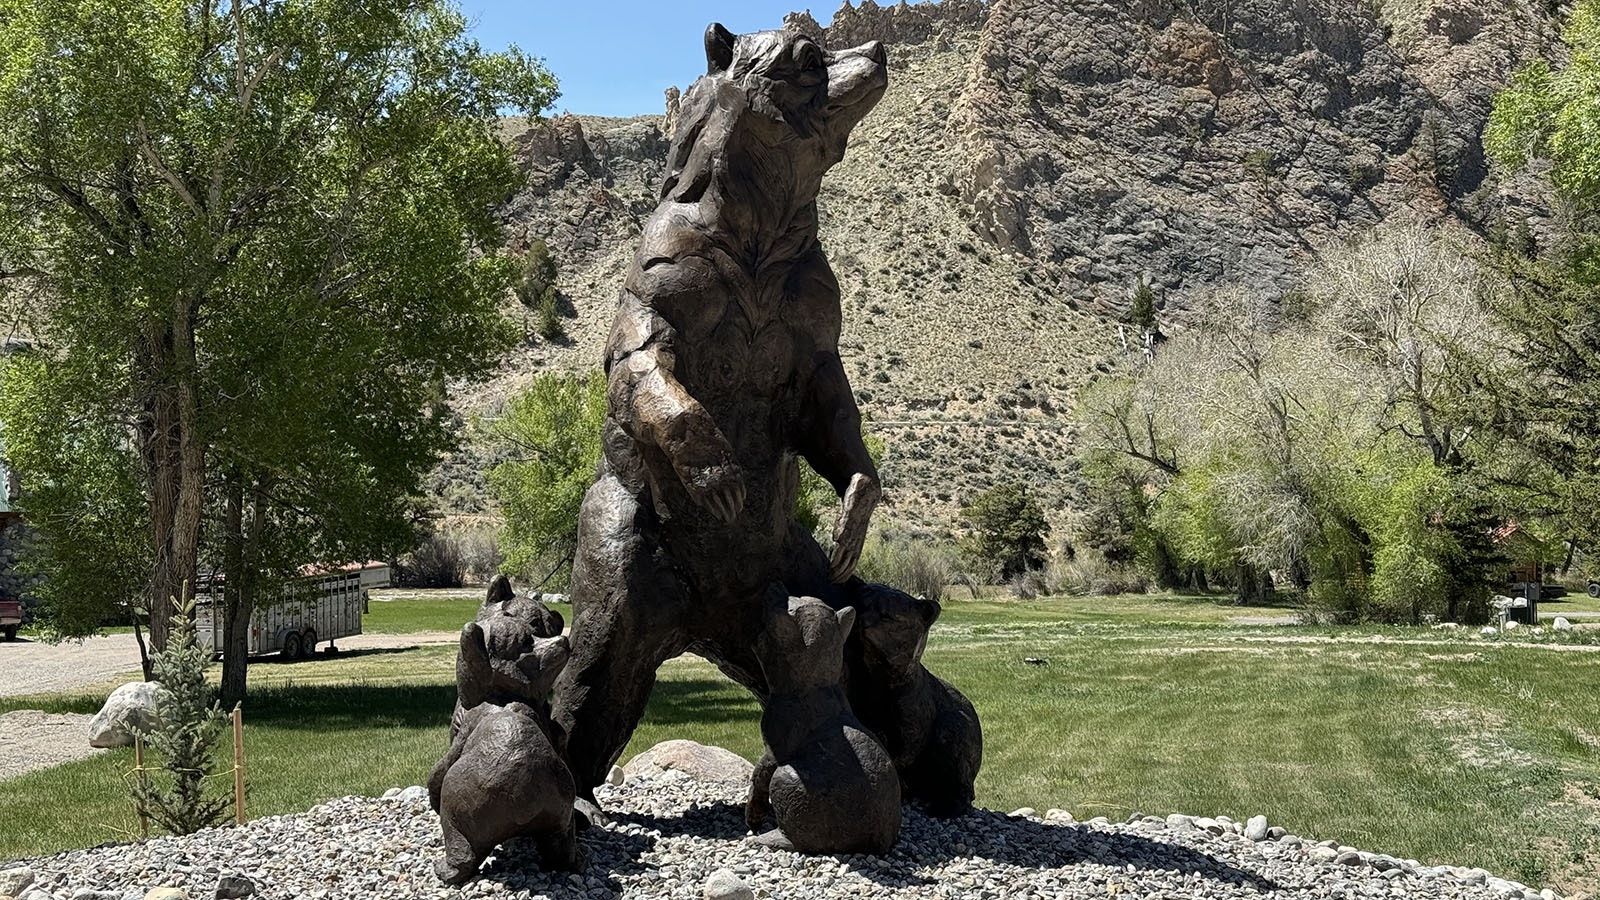 The 8-foot sculpture of Grizzly 399 outside the National Museum of Military Vehicles in Dubois. Sandy Scott created the large bronze piece, with the only requirements being that 399 had to be standing and looking to the west.